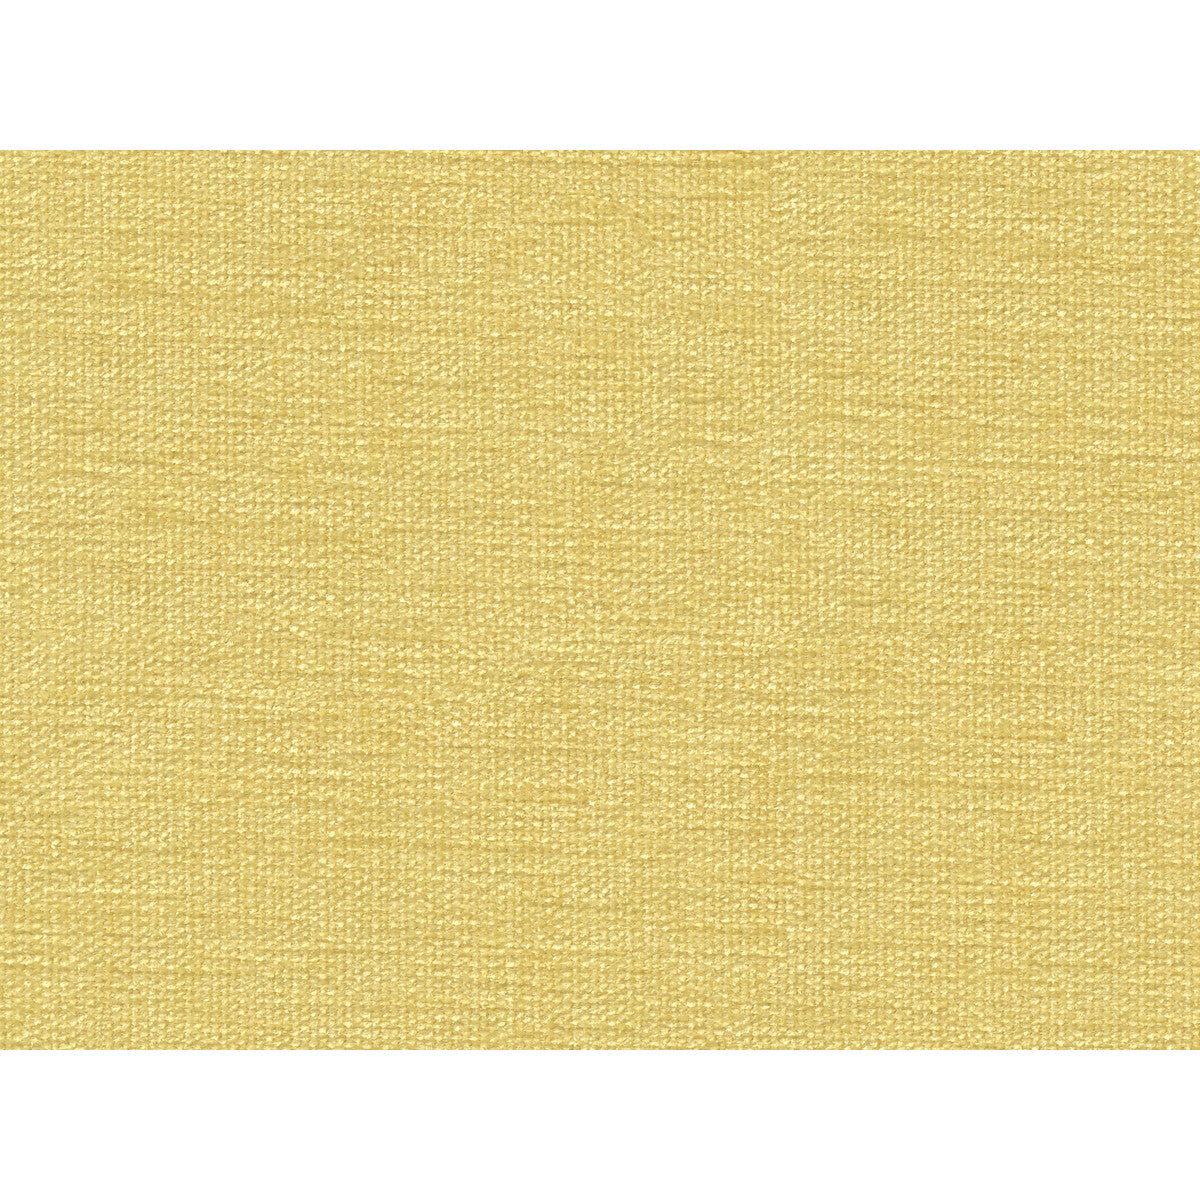 Kravet Contract fabric in 34961-114 color - pattern 34961.114.0 - by Kravet Contract in the Performance Kravetarmor collection